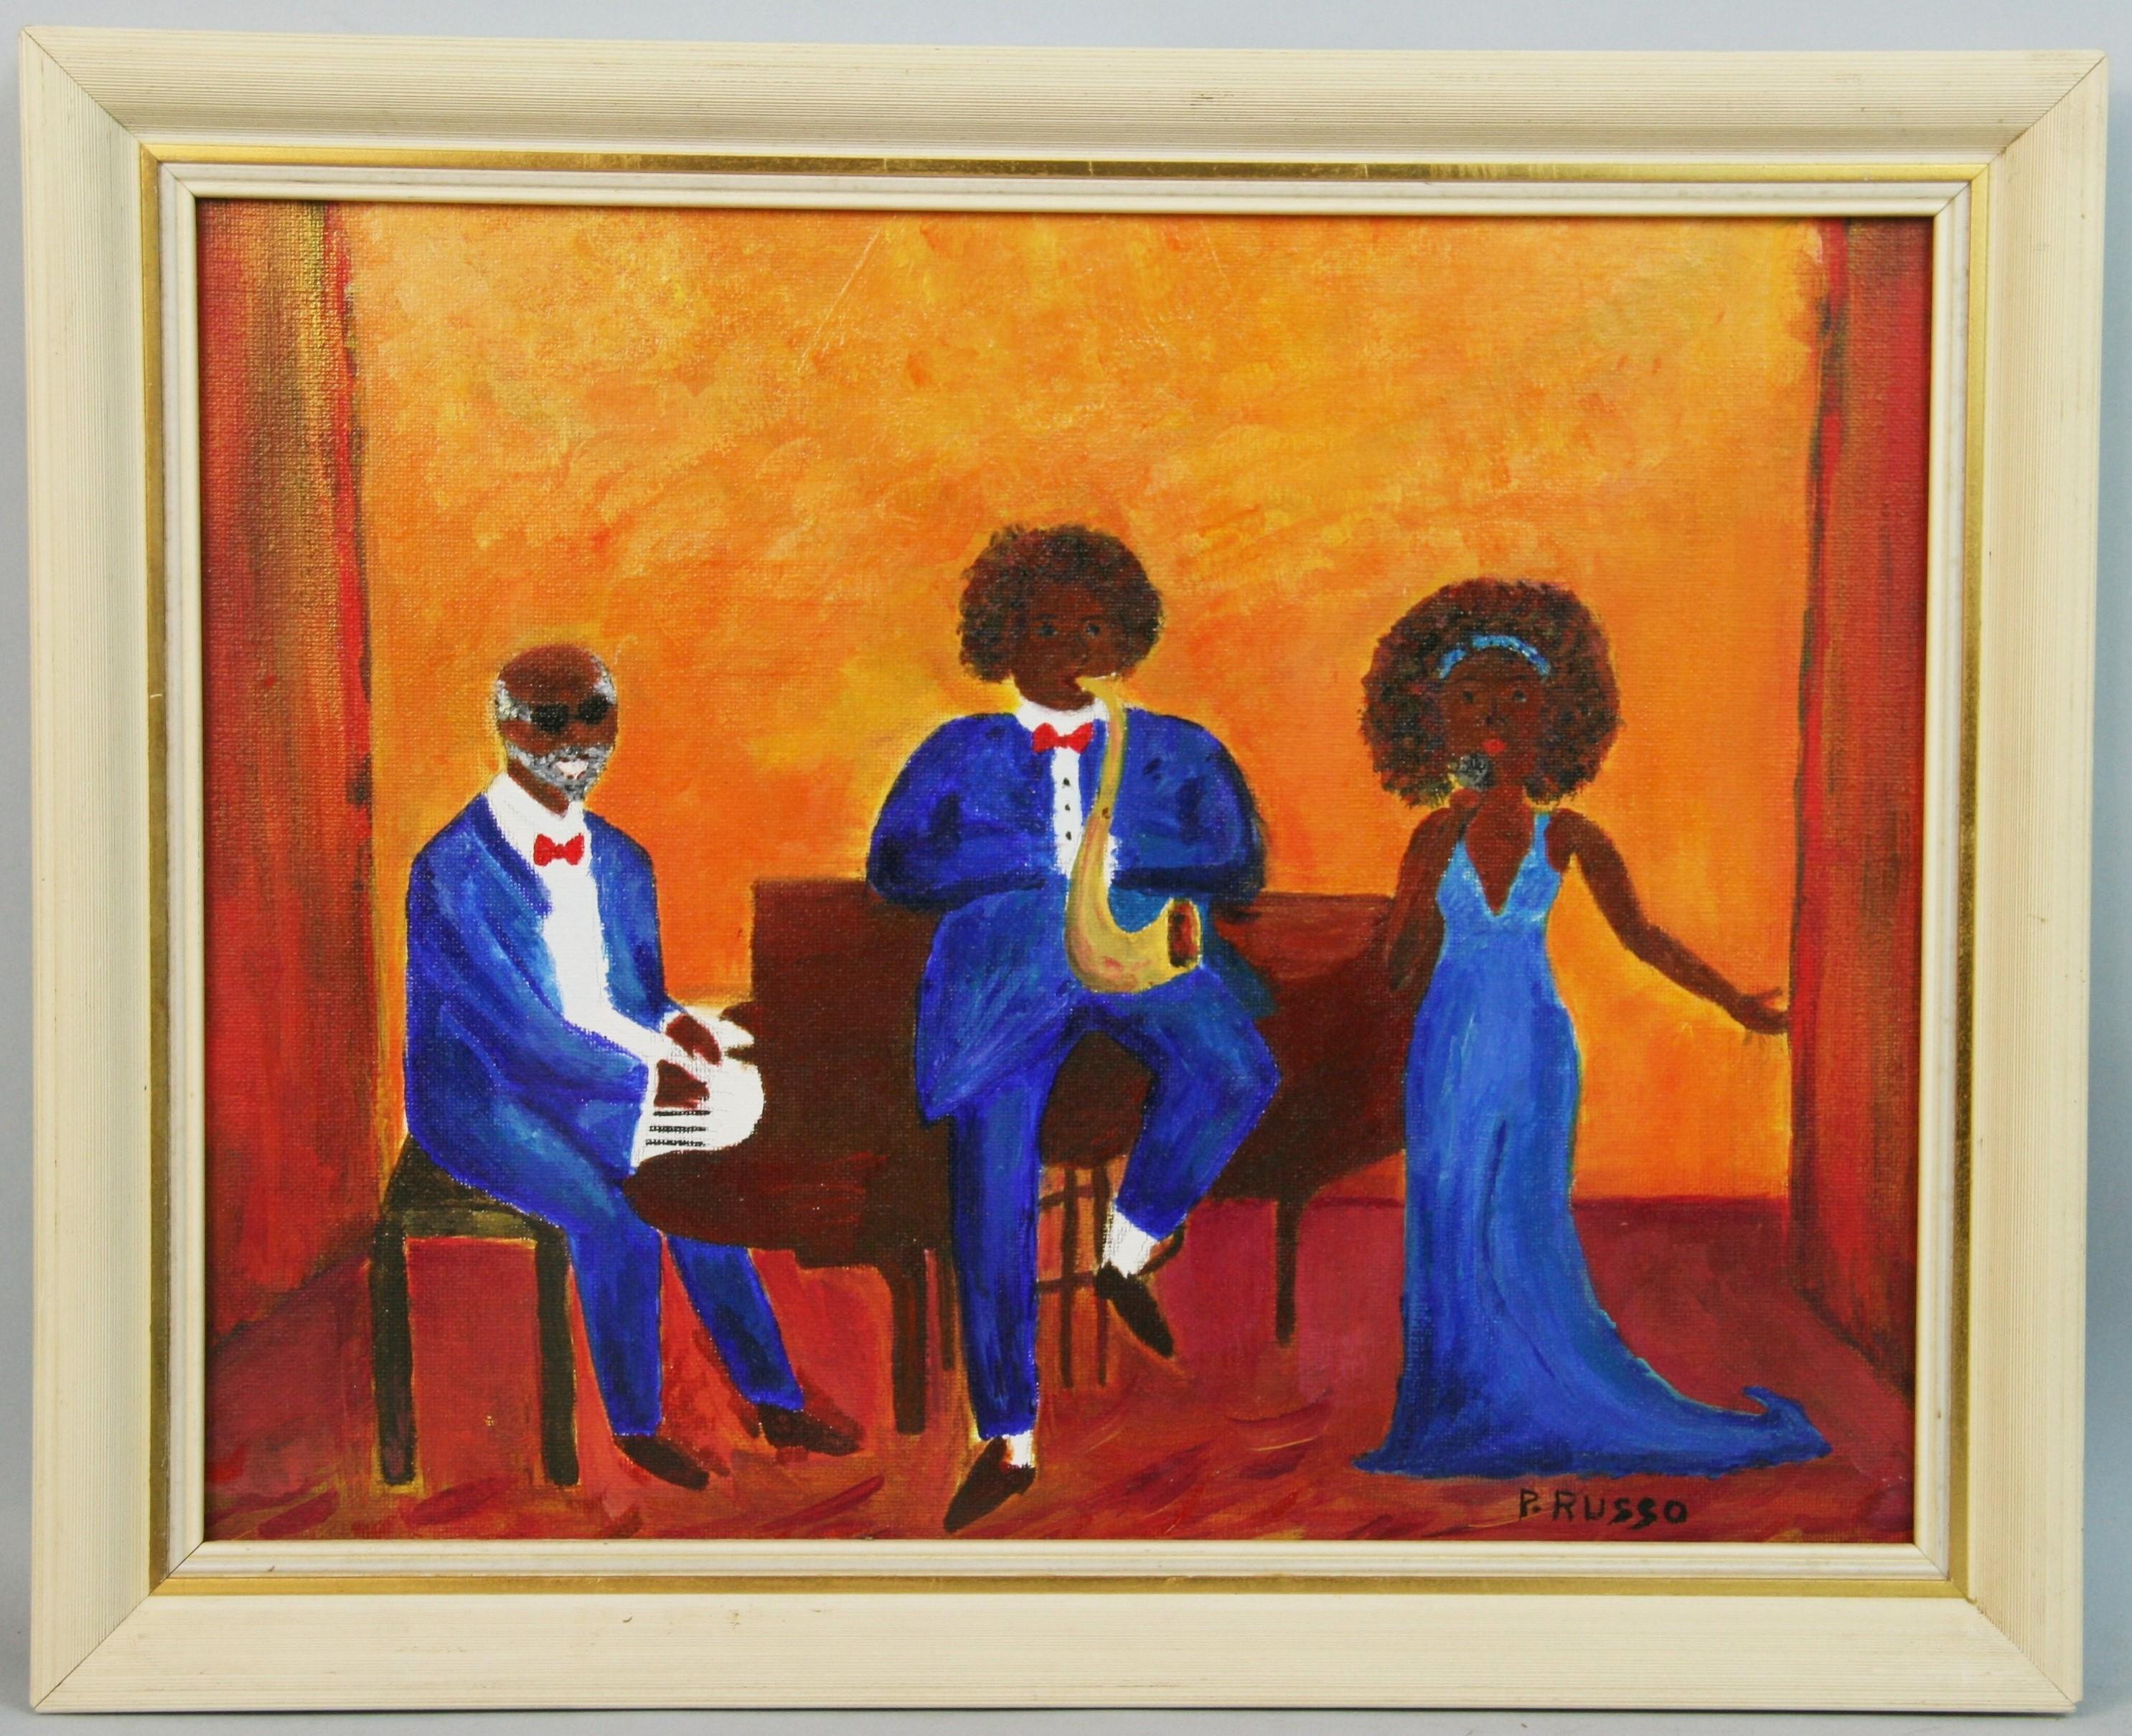 P.Russo Figurative Painting - New Orleans Jazz Group